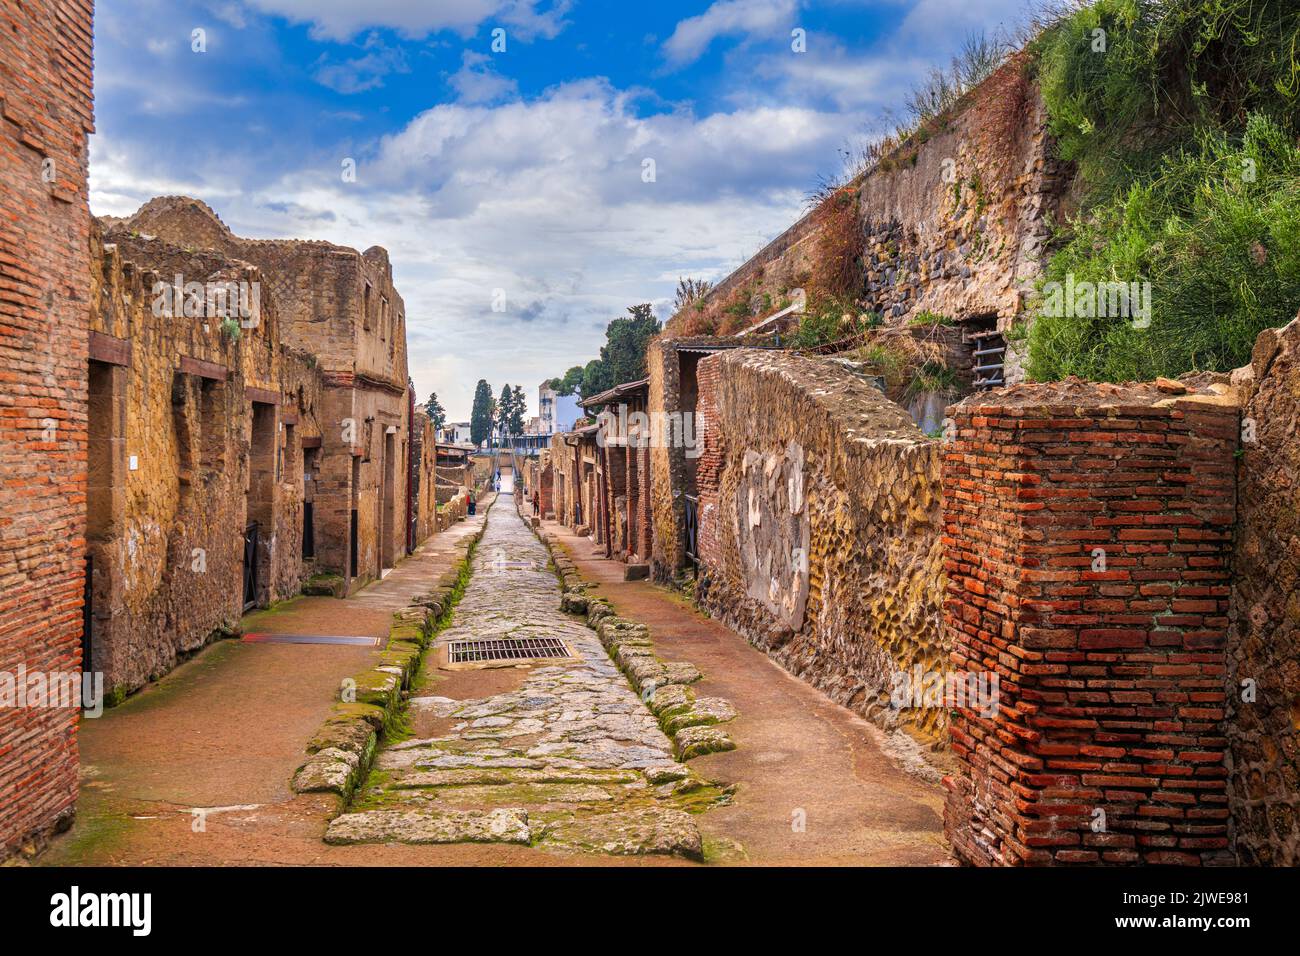 Ercolano, Italy at Herculaneum, an ancient Roman town buried in the eruption of Mount Vesuvius in AD 79. Stock Photo